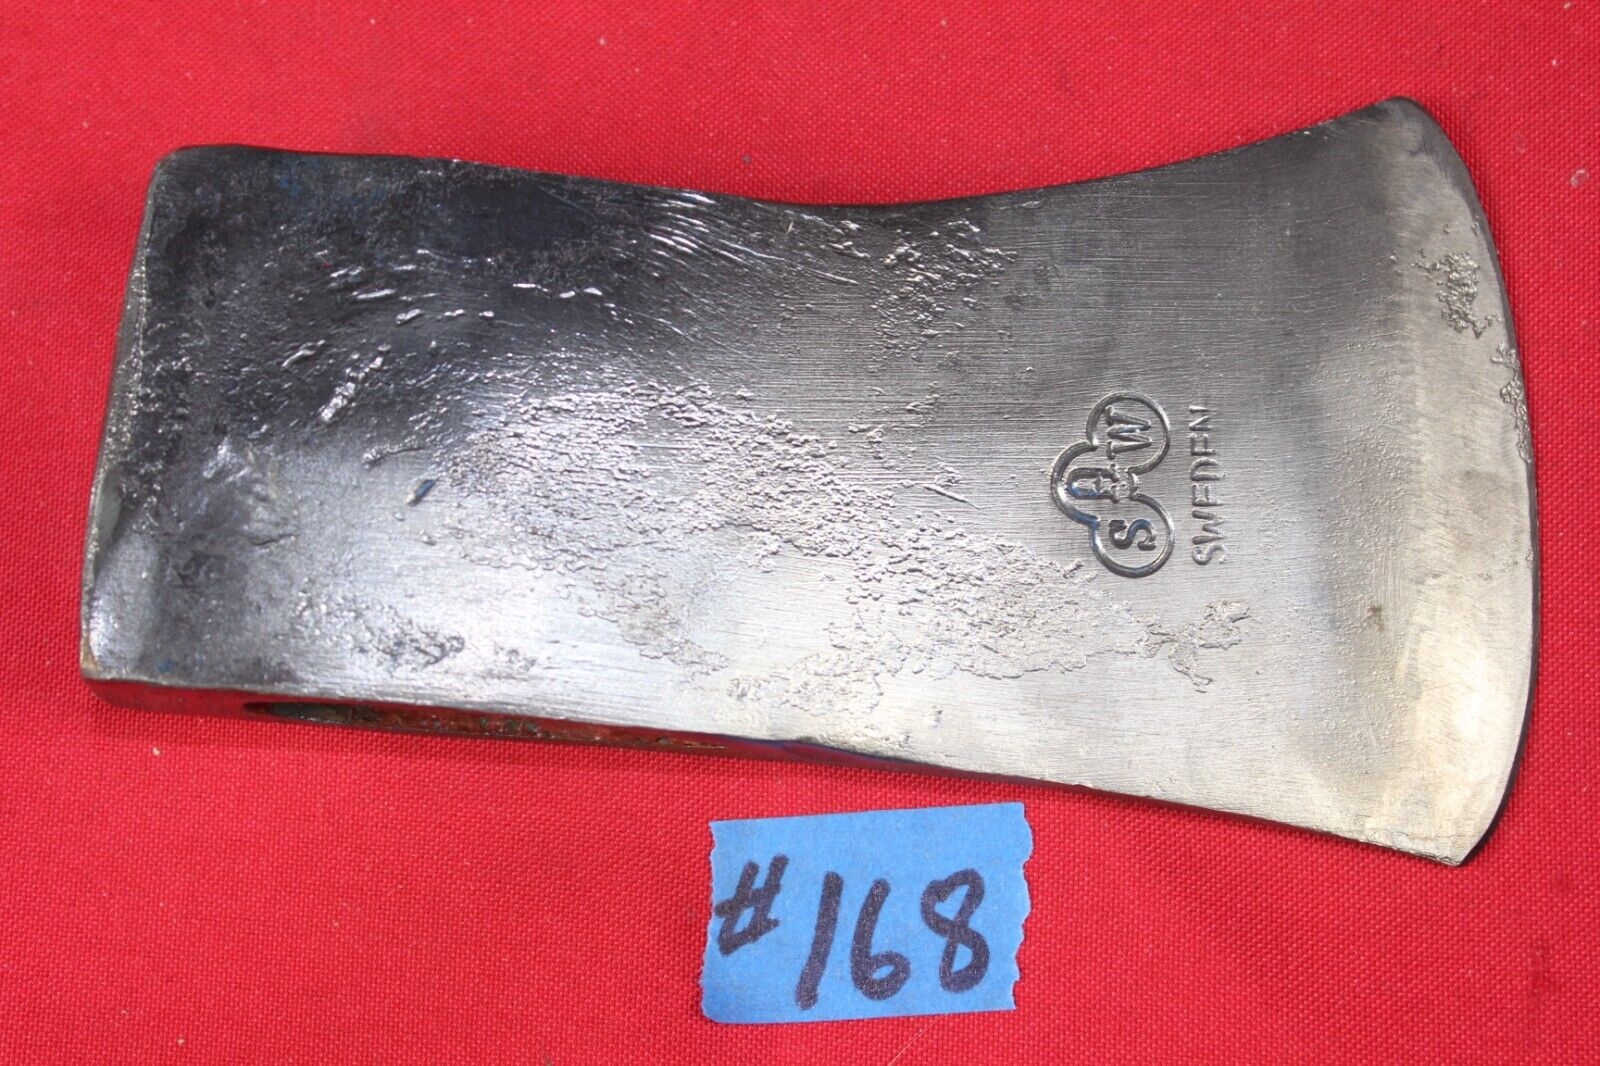 S A W  Wetterlings Axe  Head  Sweden  stamped  1.0  2-1/4 ,  Weight 2 lb  3.5 oz